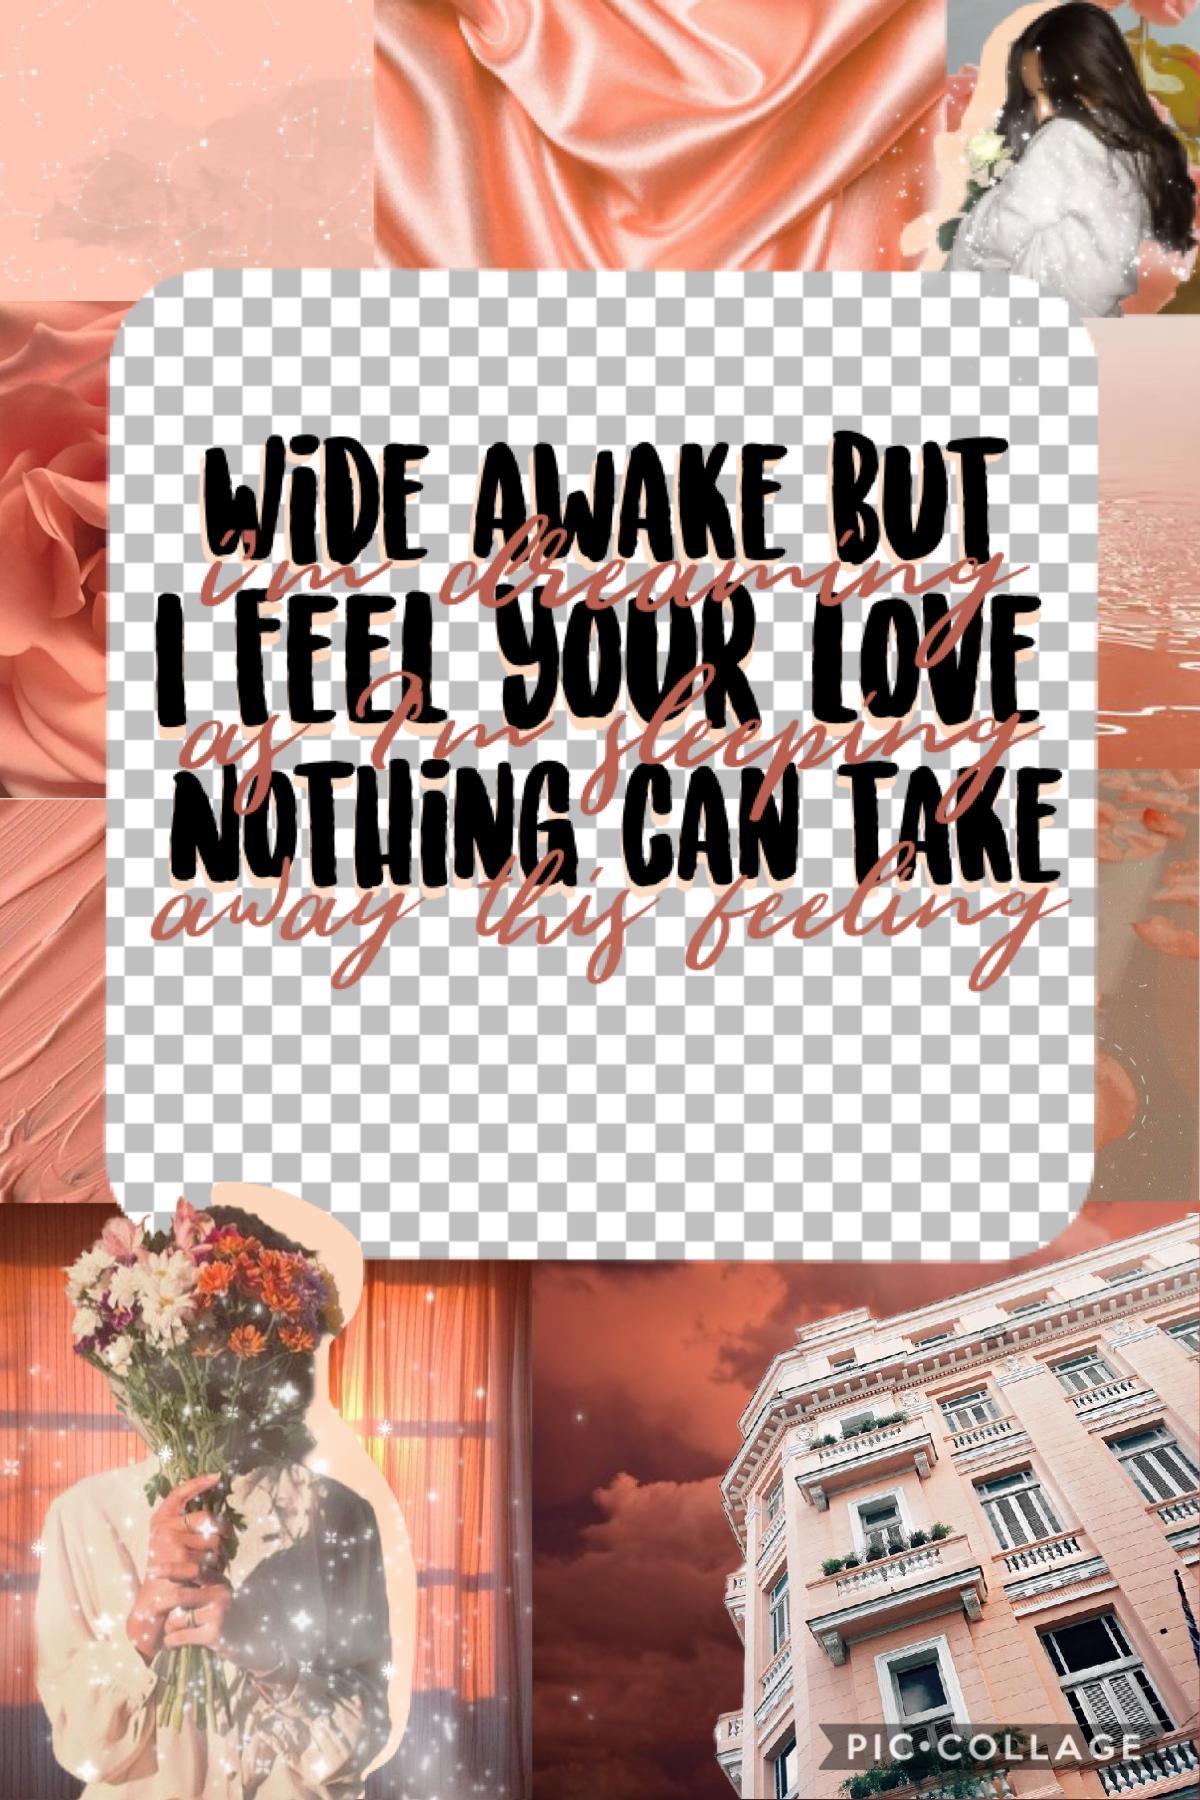 “Wide awake but I’m still dreaming. I feel your love as I’m sleeping. Nothing can take away this feeling.”quote by me bc thjngs are great😁😁✨✨✨✨How are you guys? My collage ability is going so far downhill💀